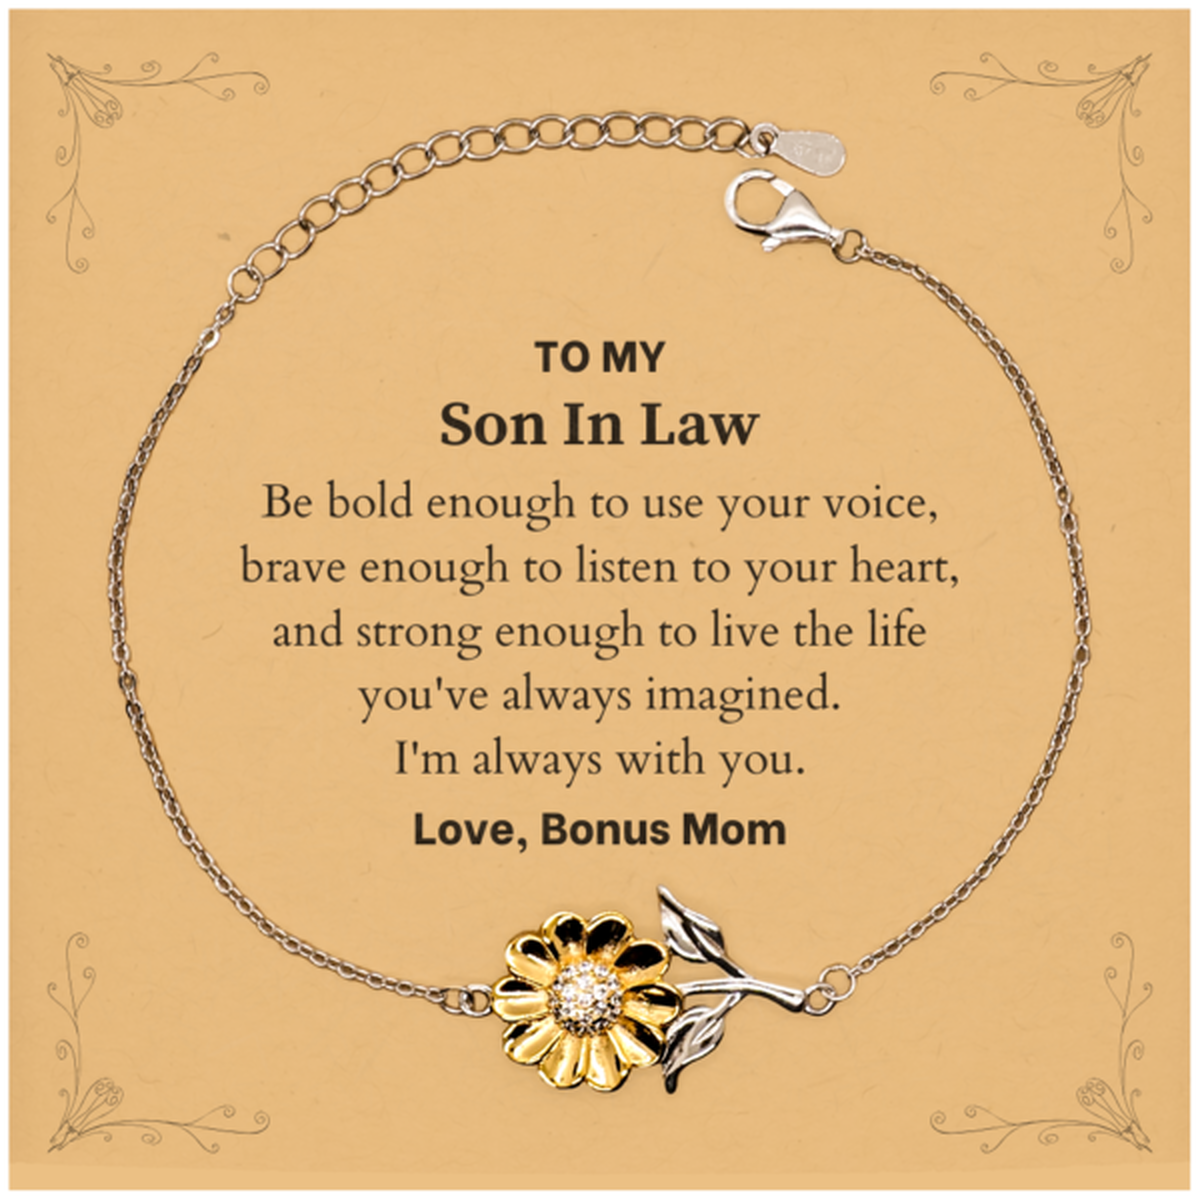 Keepsake Son In Law Sunflower Bracelet Gift Idea Graduation Christmas Birthday Son In Law from Bonus Mom, Son In Law Be bold enough to use your voice, brave enough to listen to your heart. Love, Bonus Mom